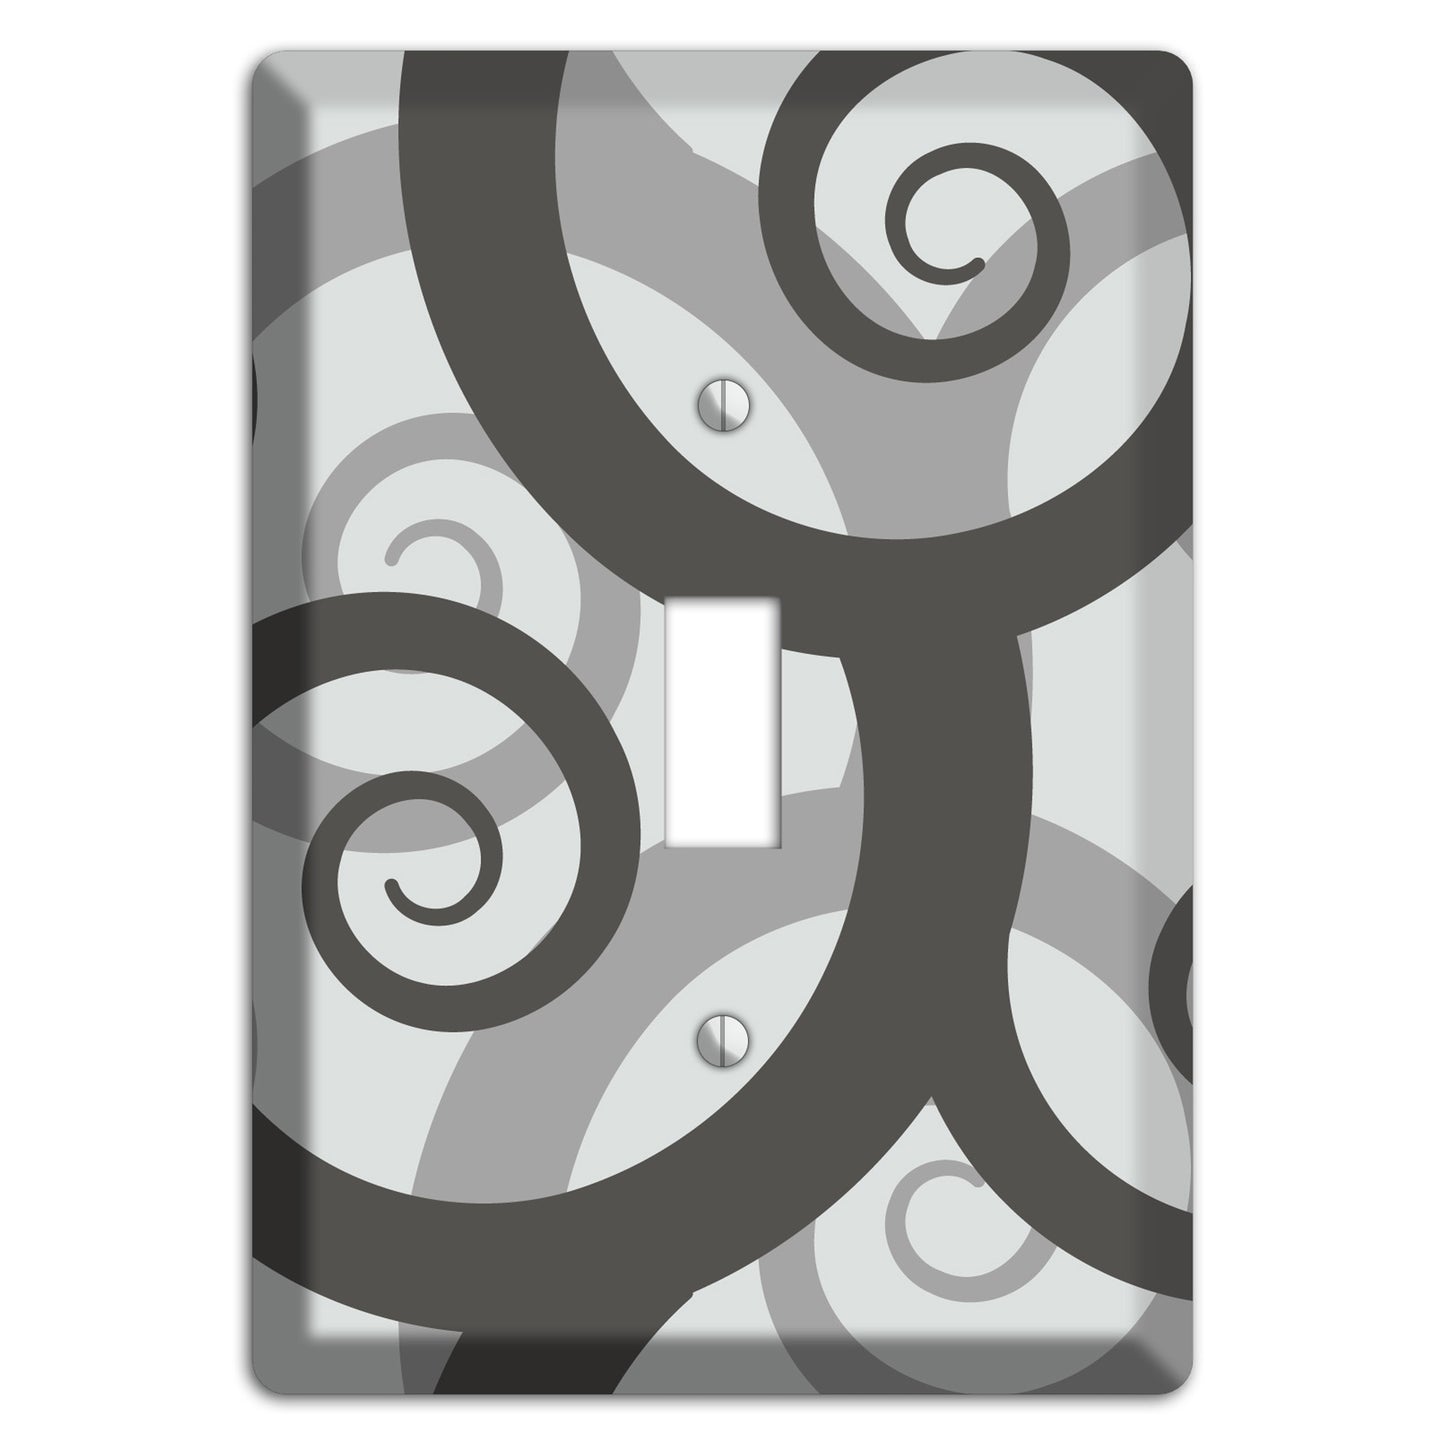 Grey with Black Large Swirl Cover Plates